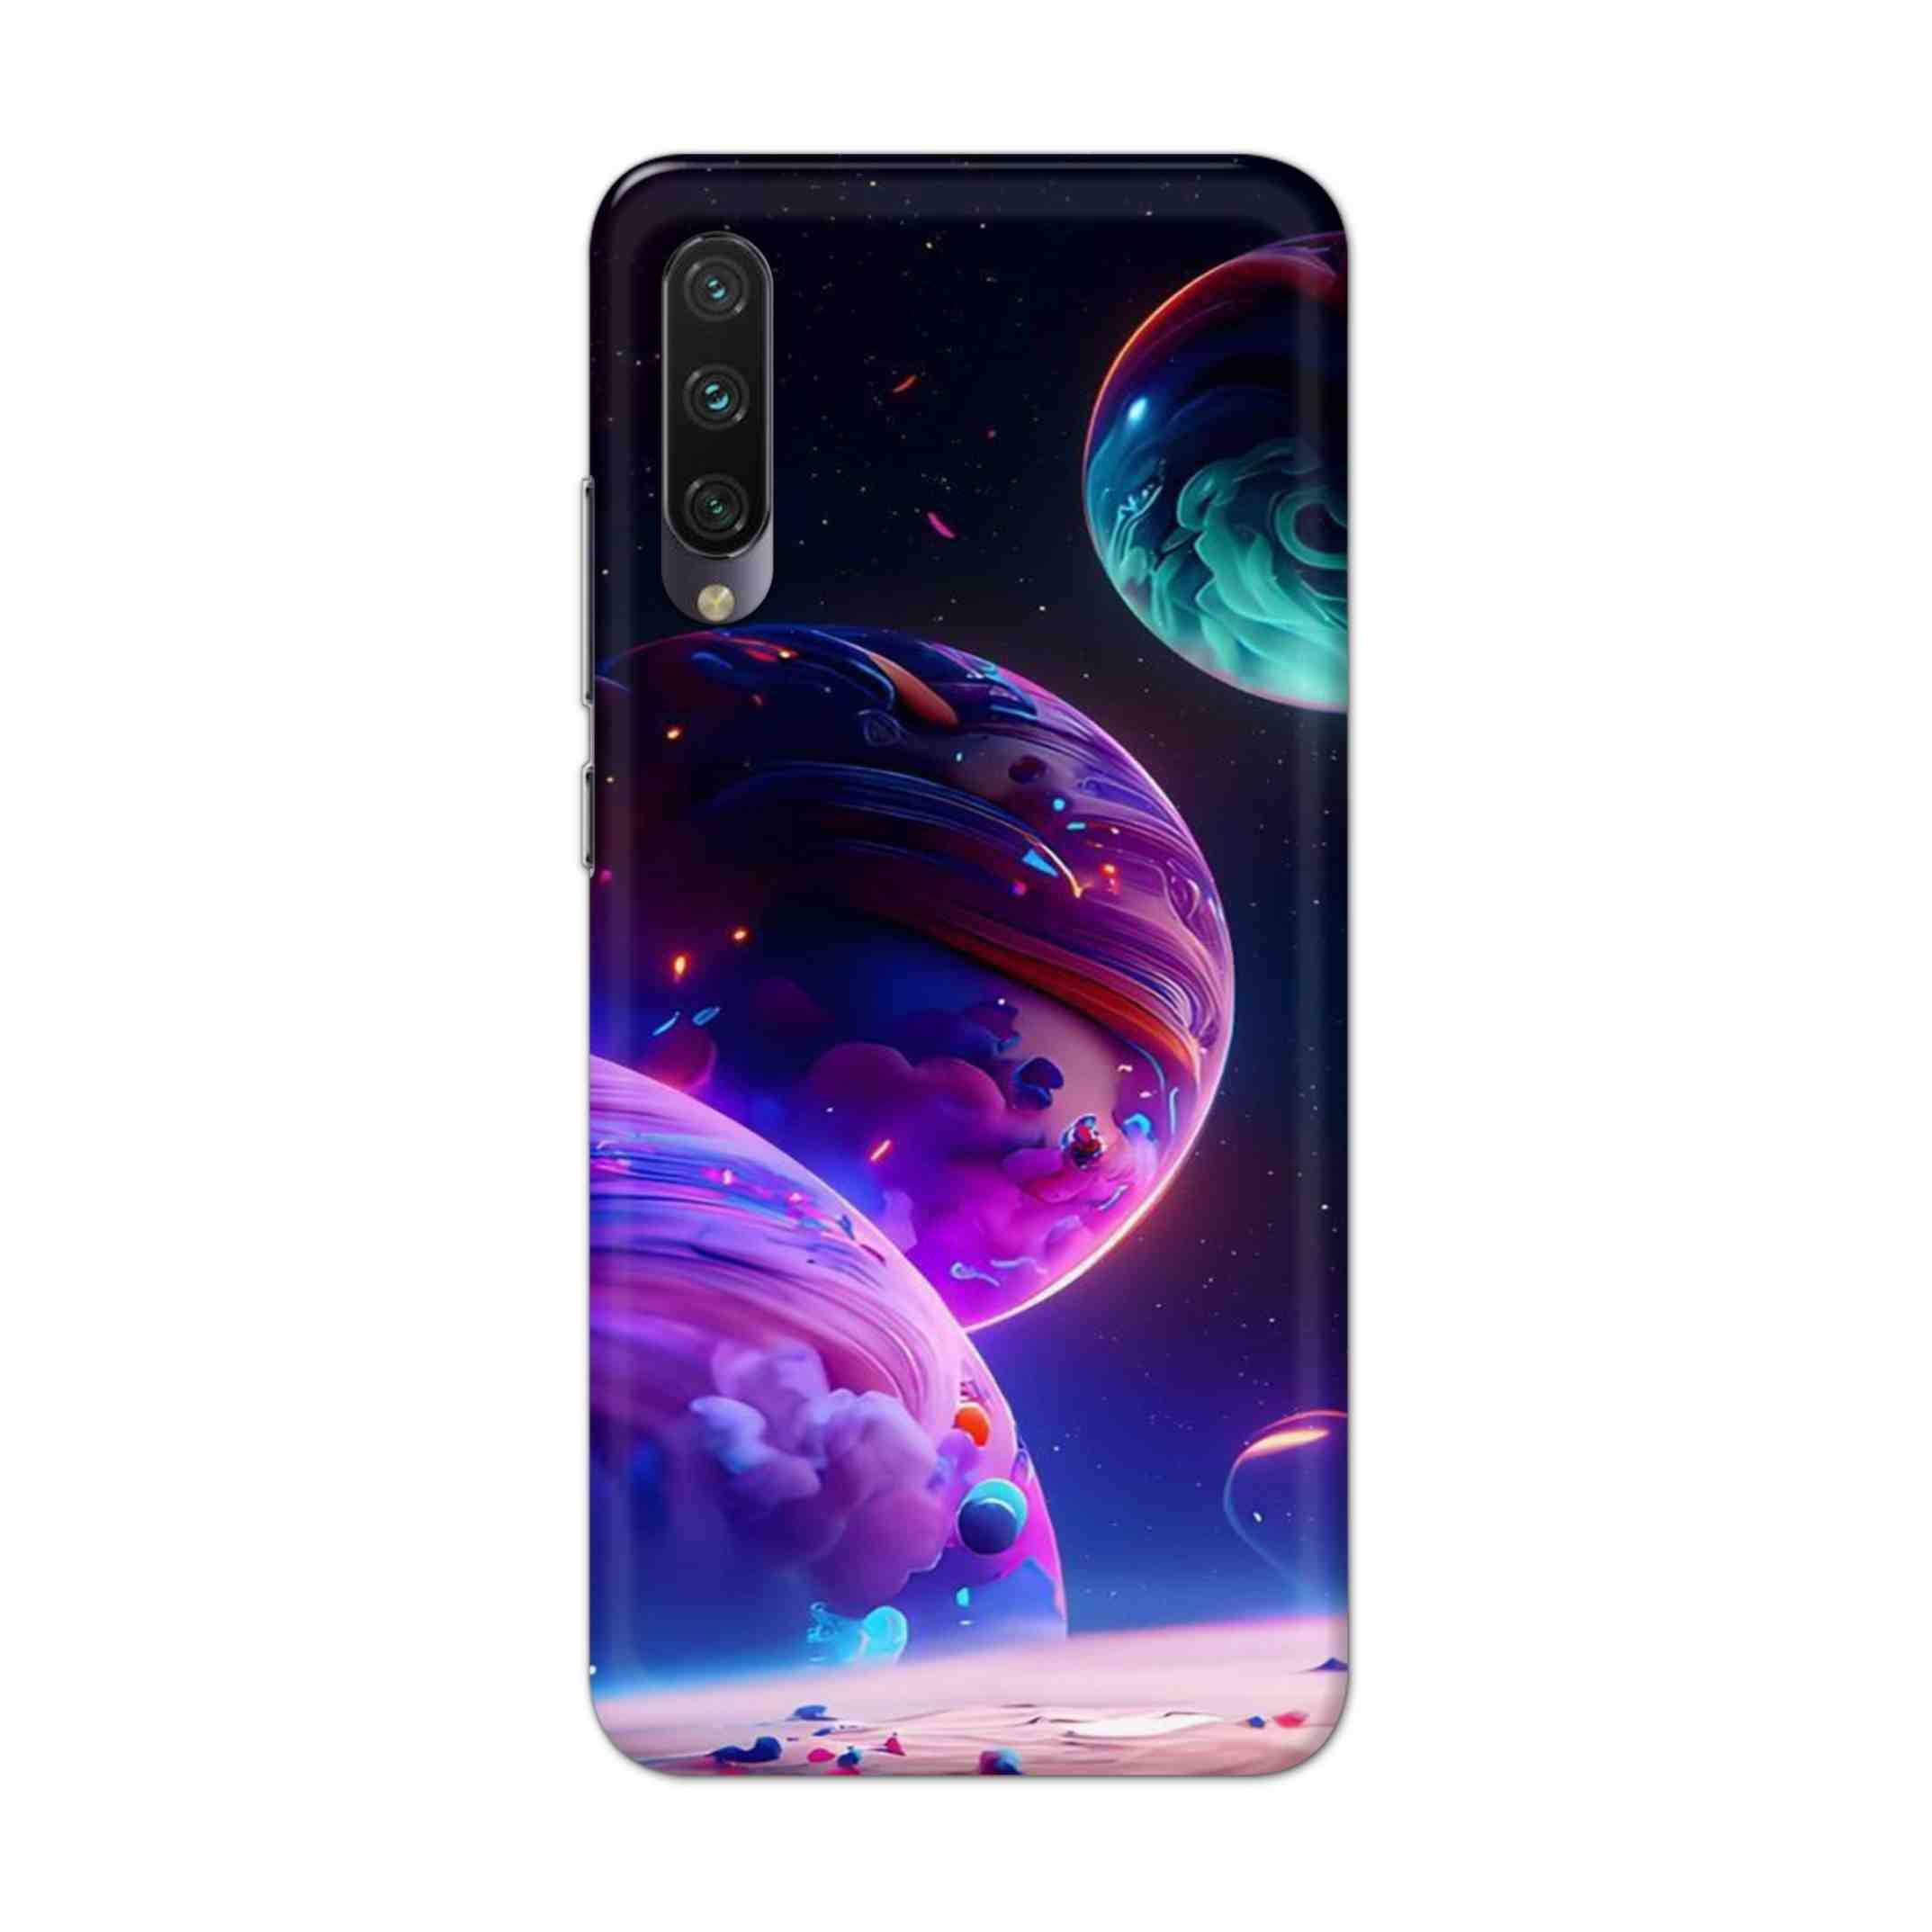 Buy 3 Earth Hard Back Mobile Phone Case Cover For Xiaomi Mi A3 Online